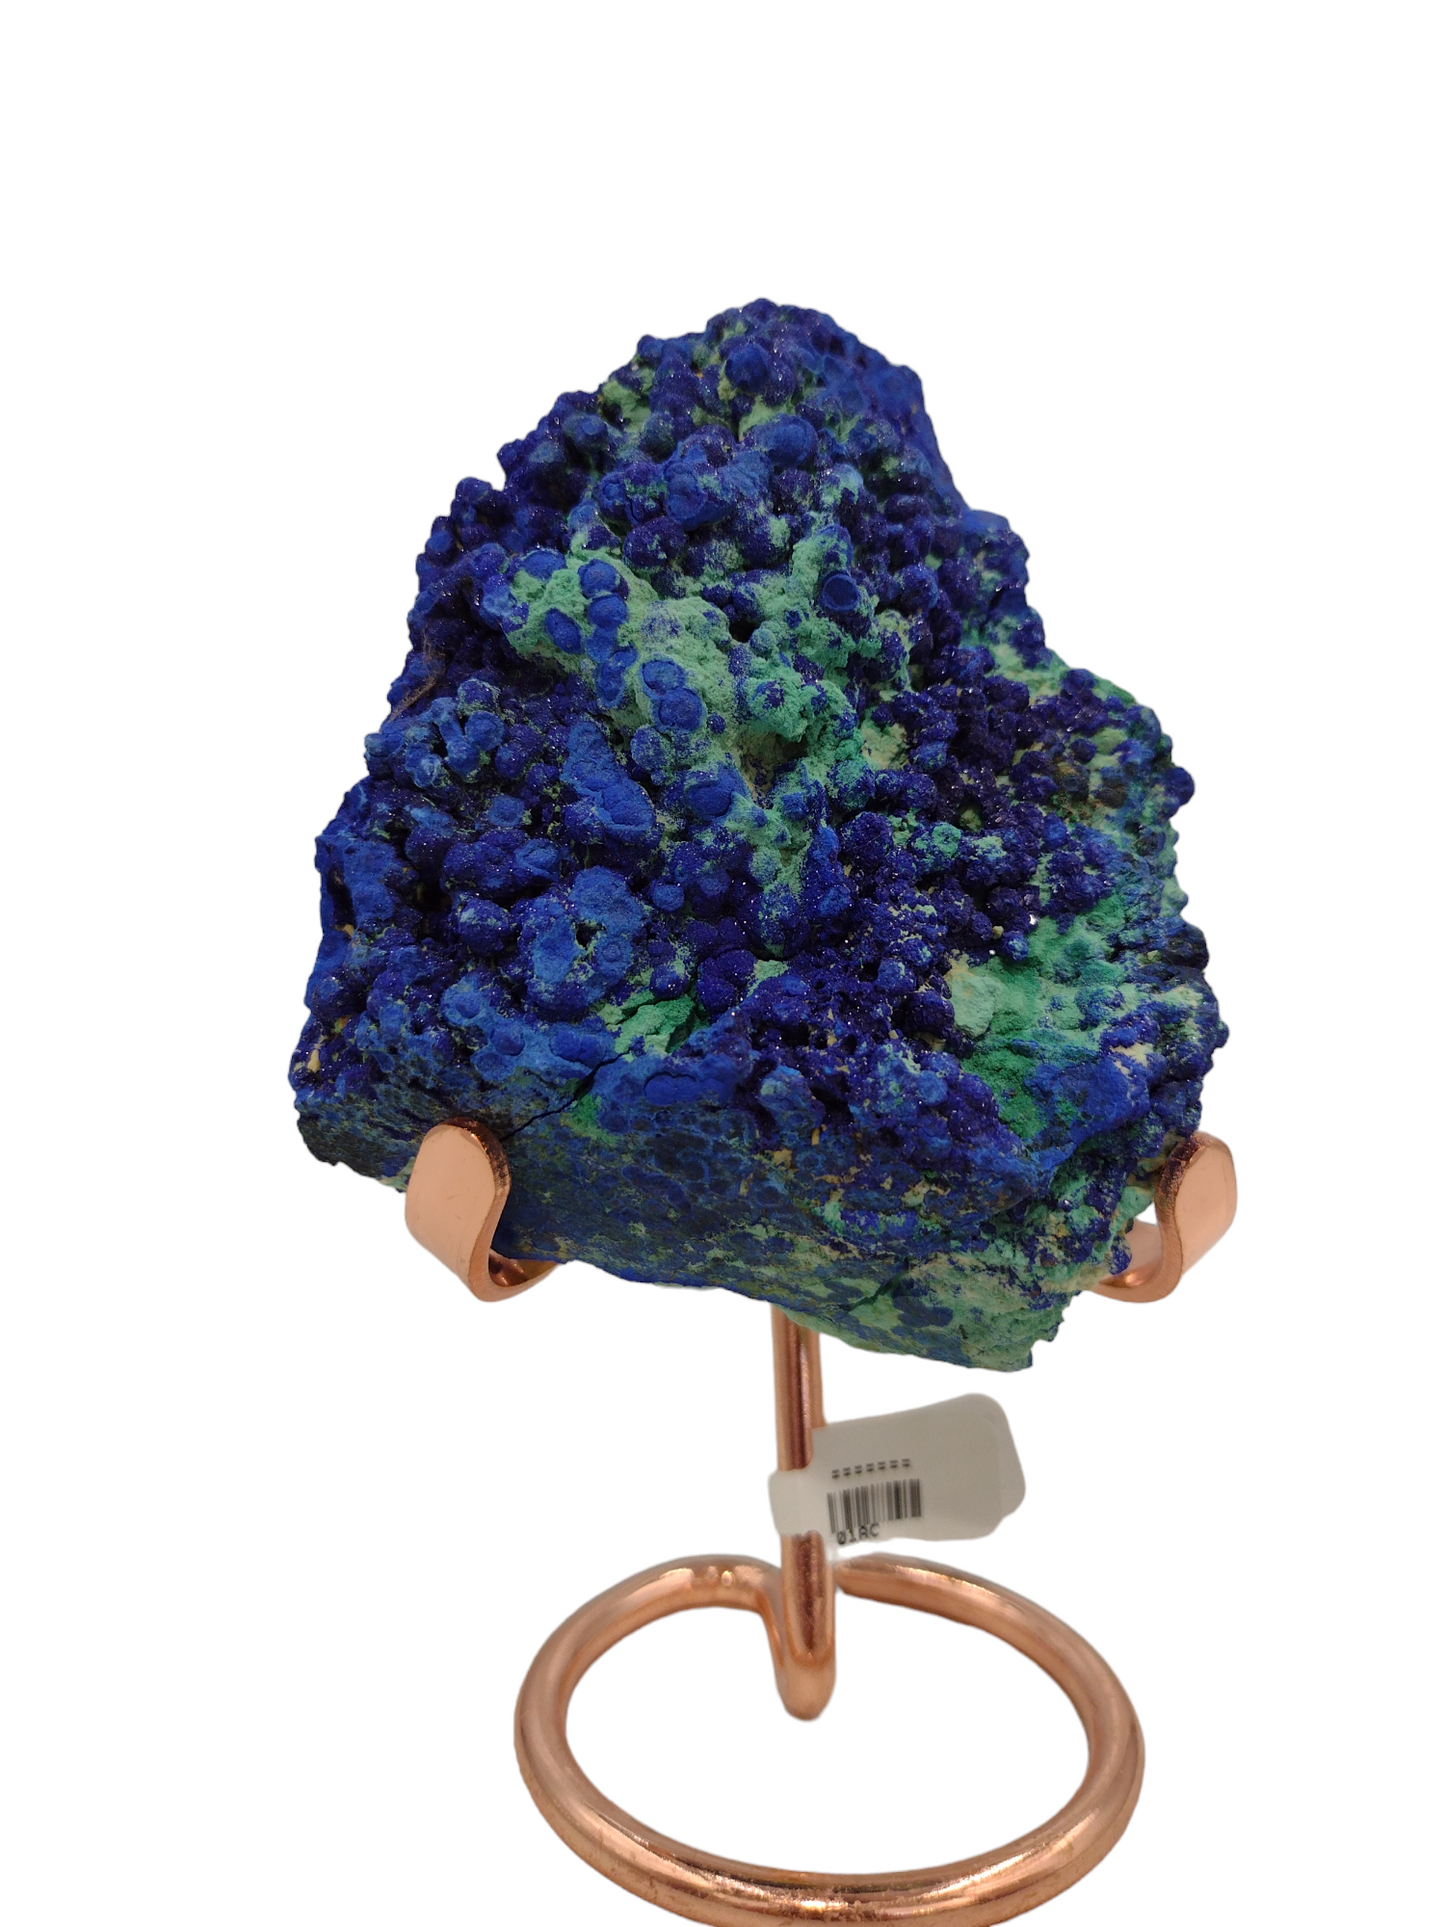 Azurite with Chrysocolla Specimen (Free Shipping)